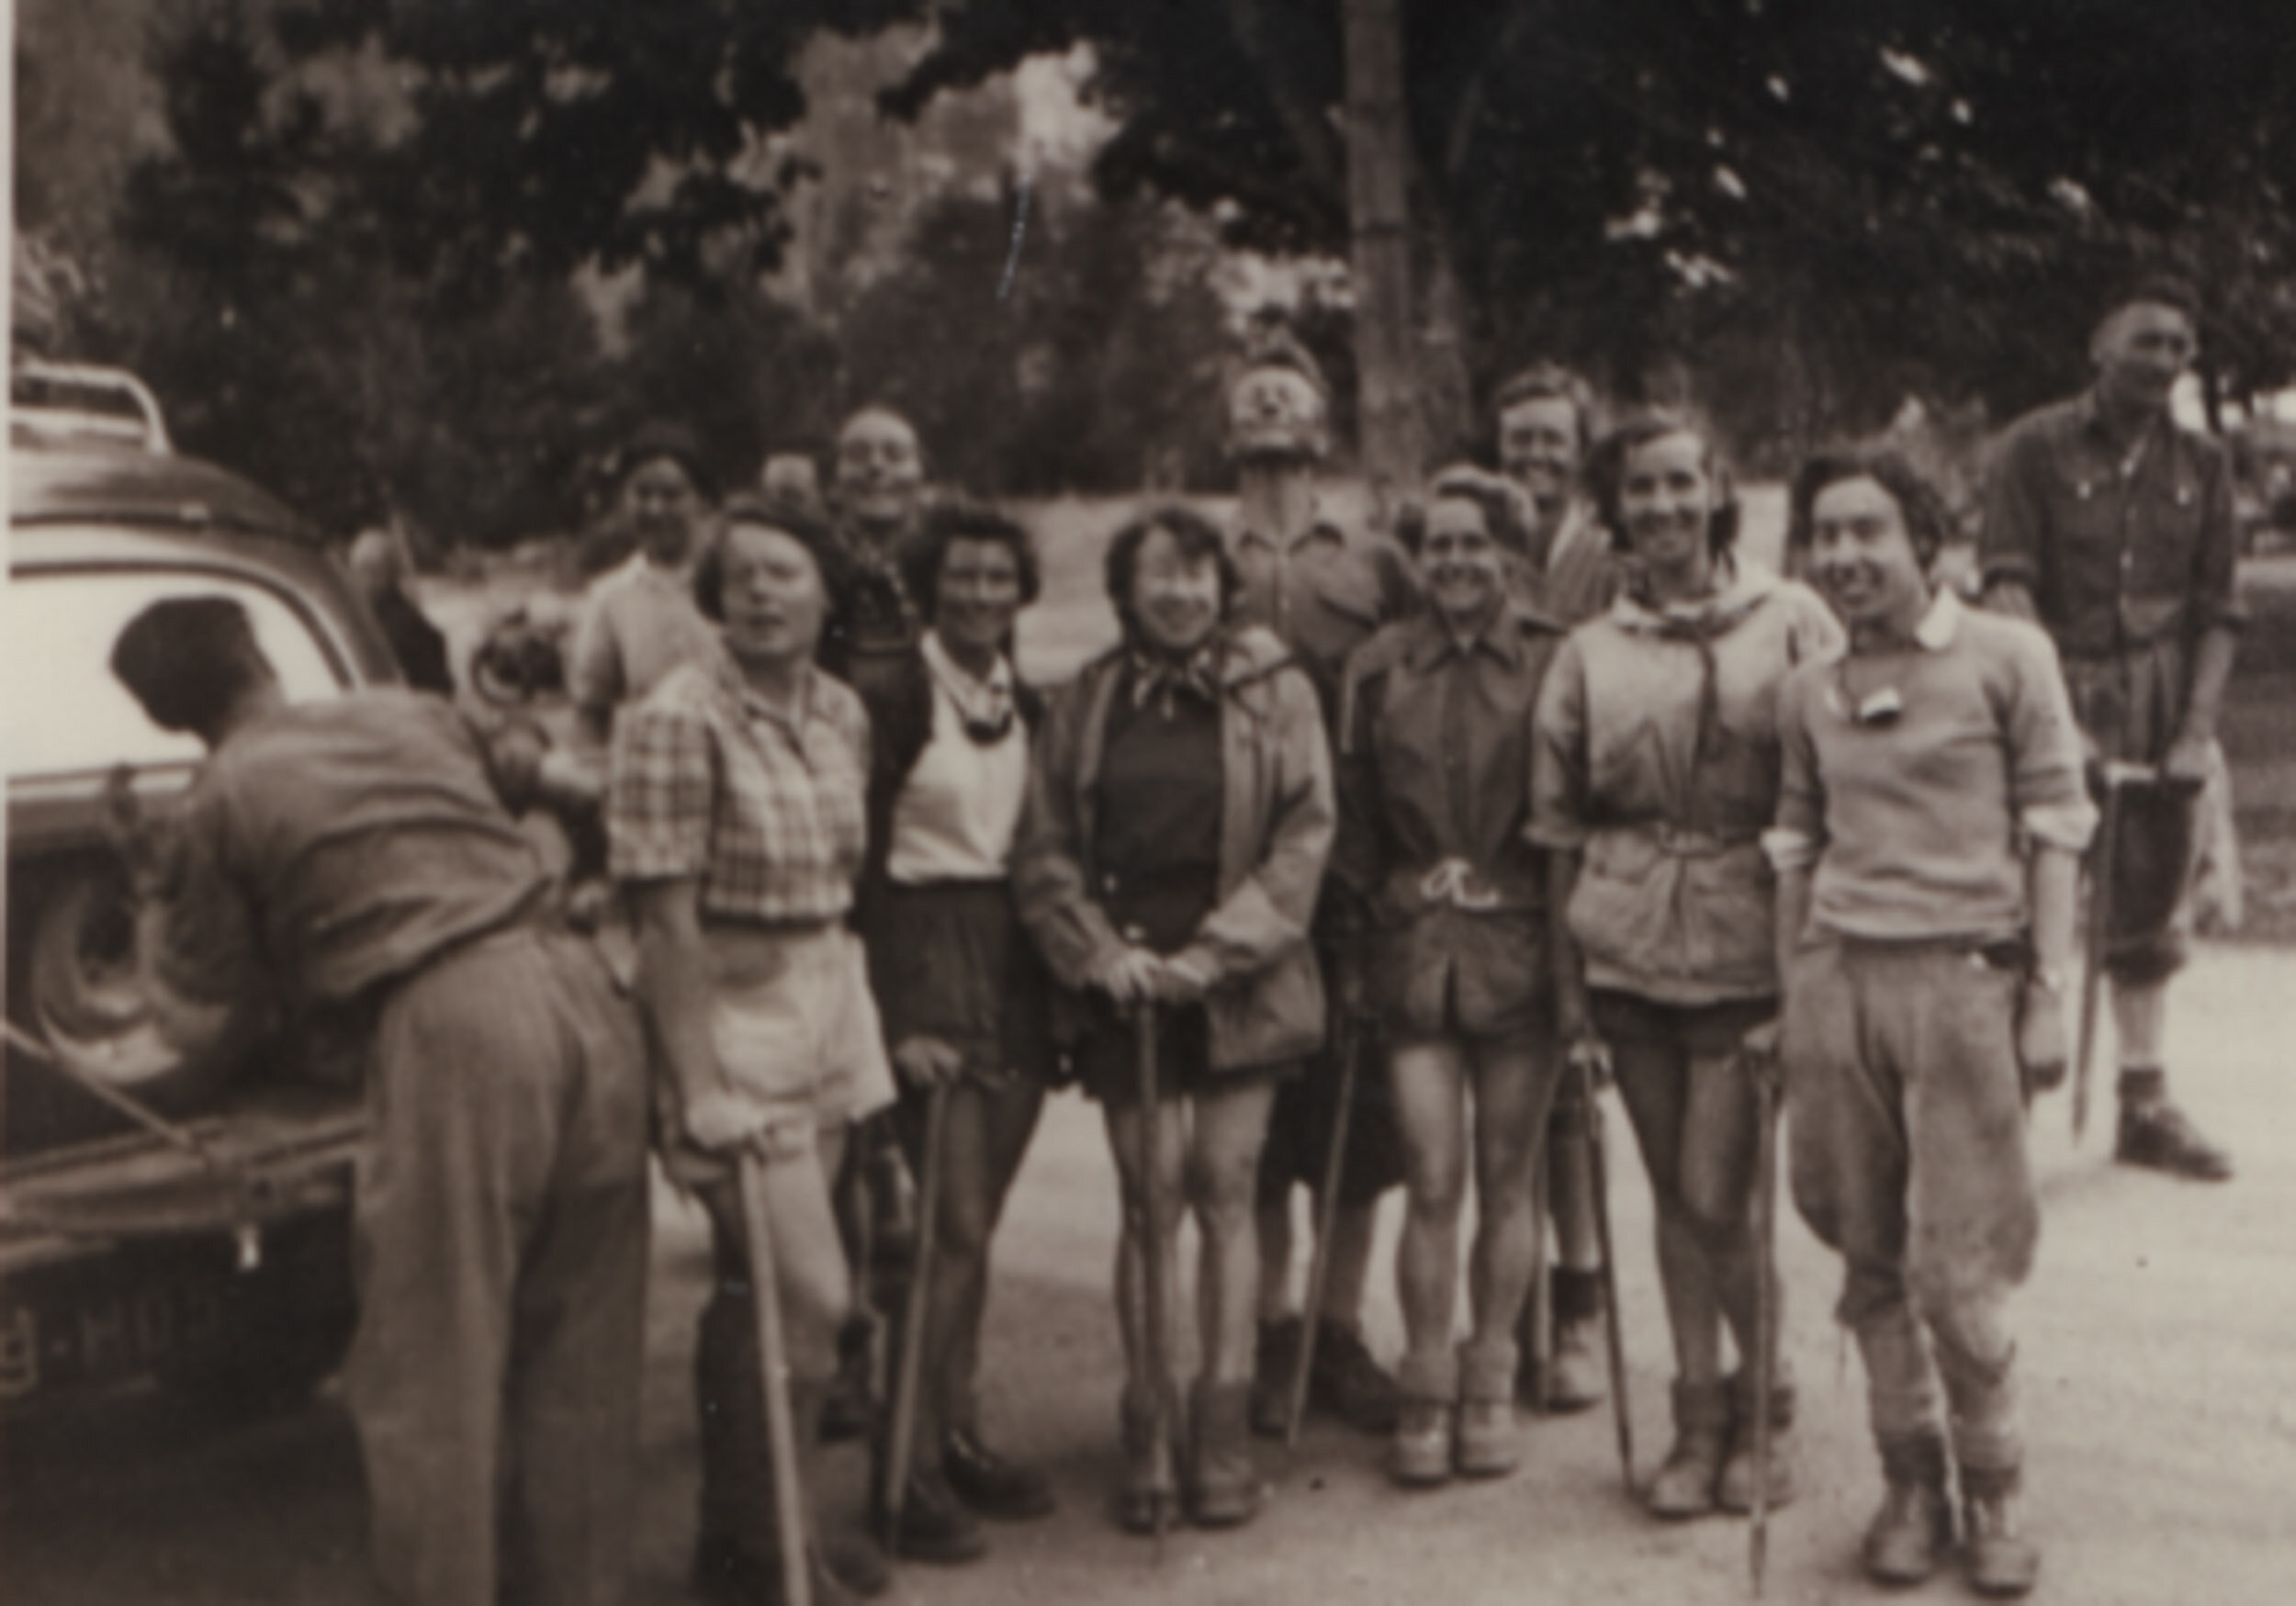 They did all fit in one taxi: Beryl, Annis Flew, Suzanne Gibson, Nea Morin, Rienetta Herbert née Leggett and others, Le Bez, French Alps, 1954